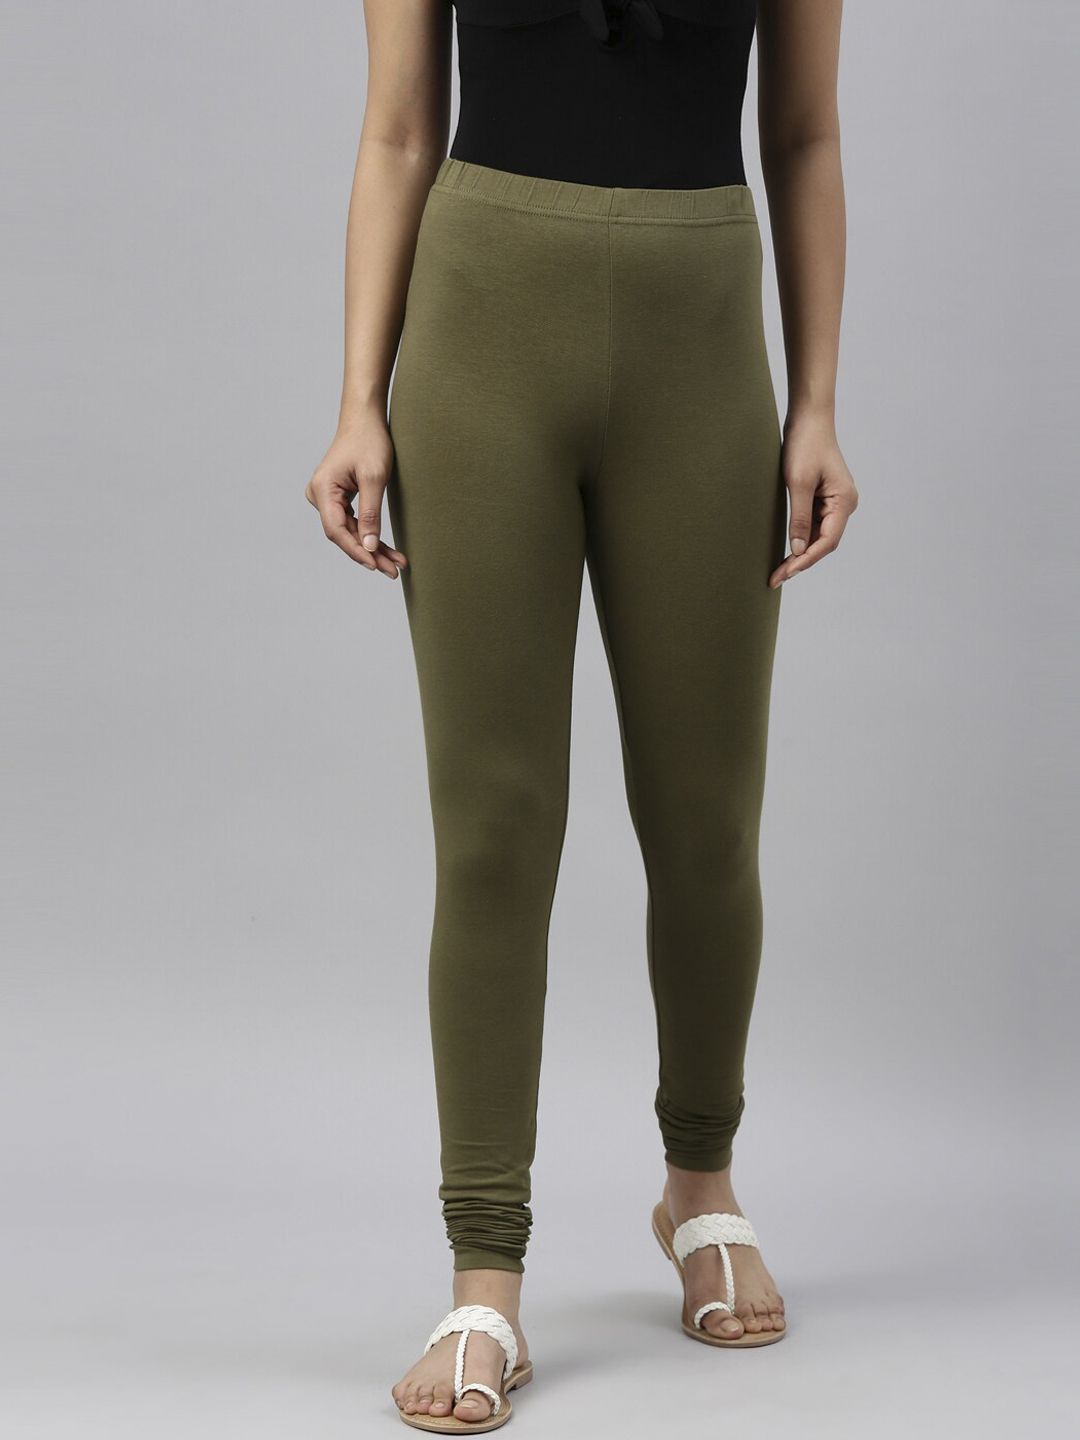 Go Colors Women Olive GreenSolid Churidar-Length Leggings Price in India